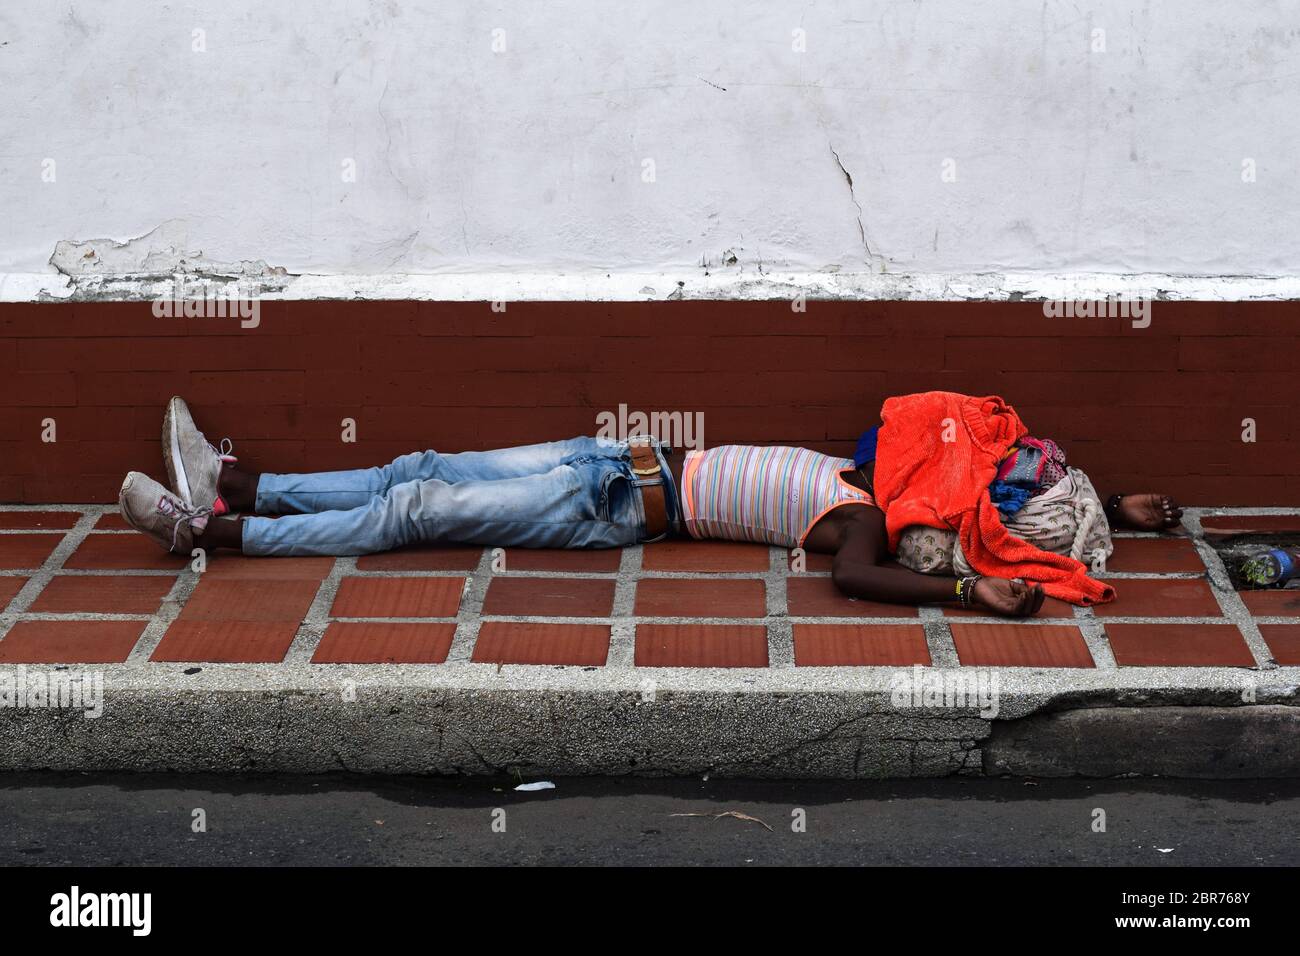 Homeless man sleeping in the streets of Cali during Coronavirus outbreak in Colombia Stock Photo